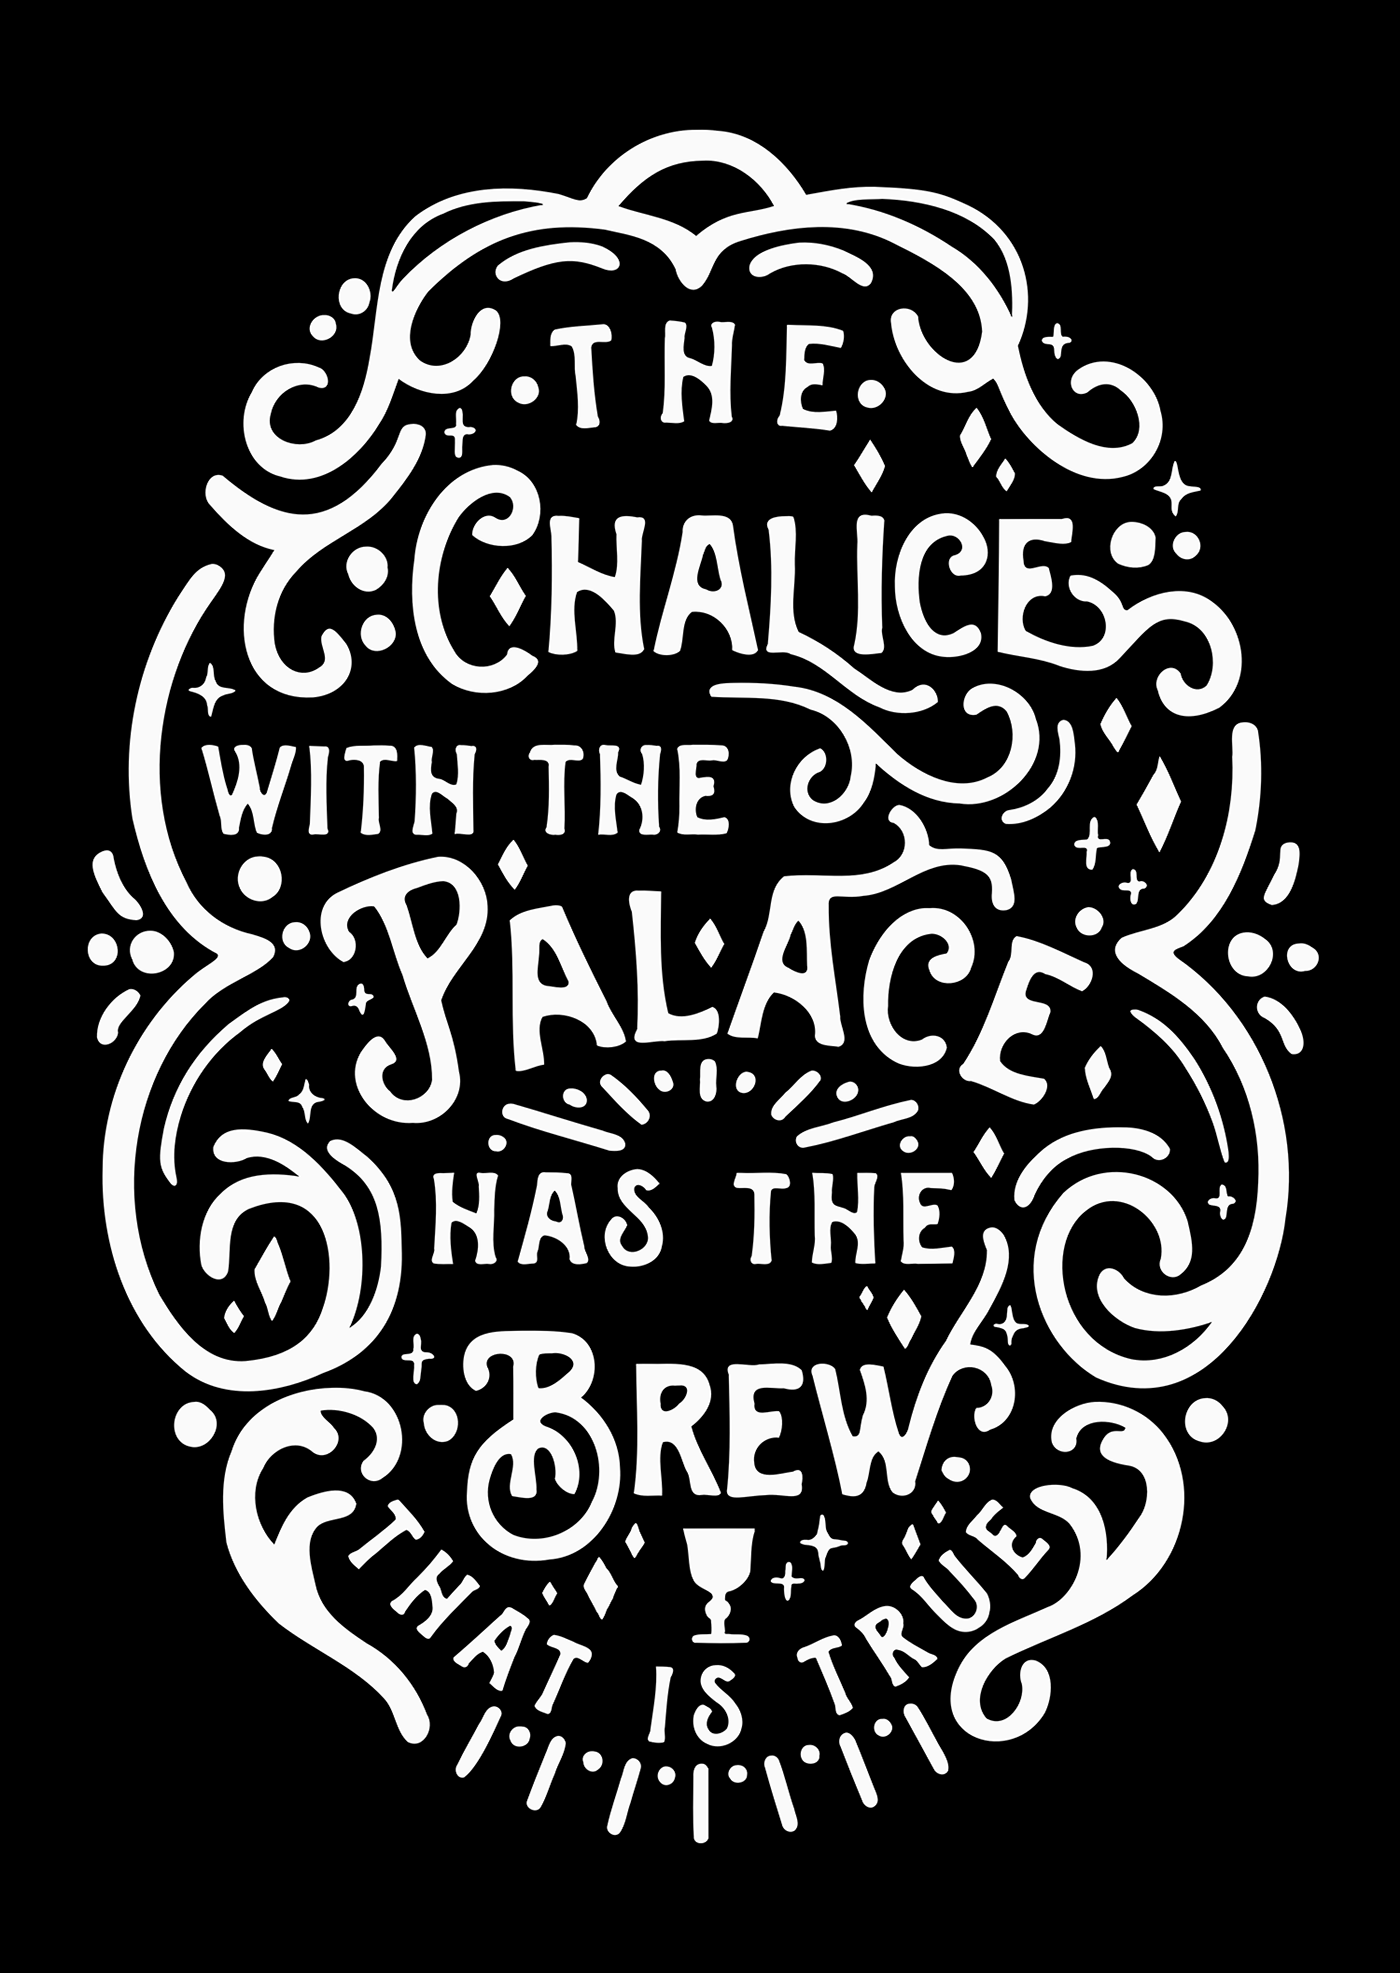 typography reads "the chalice with the palace has the brew that is true".